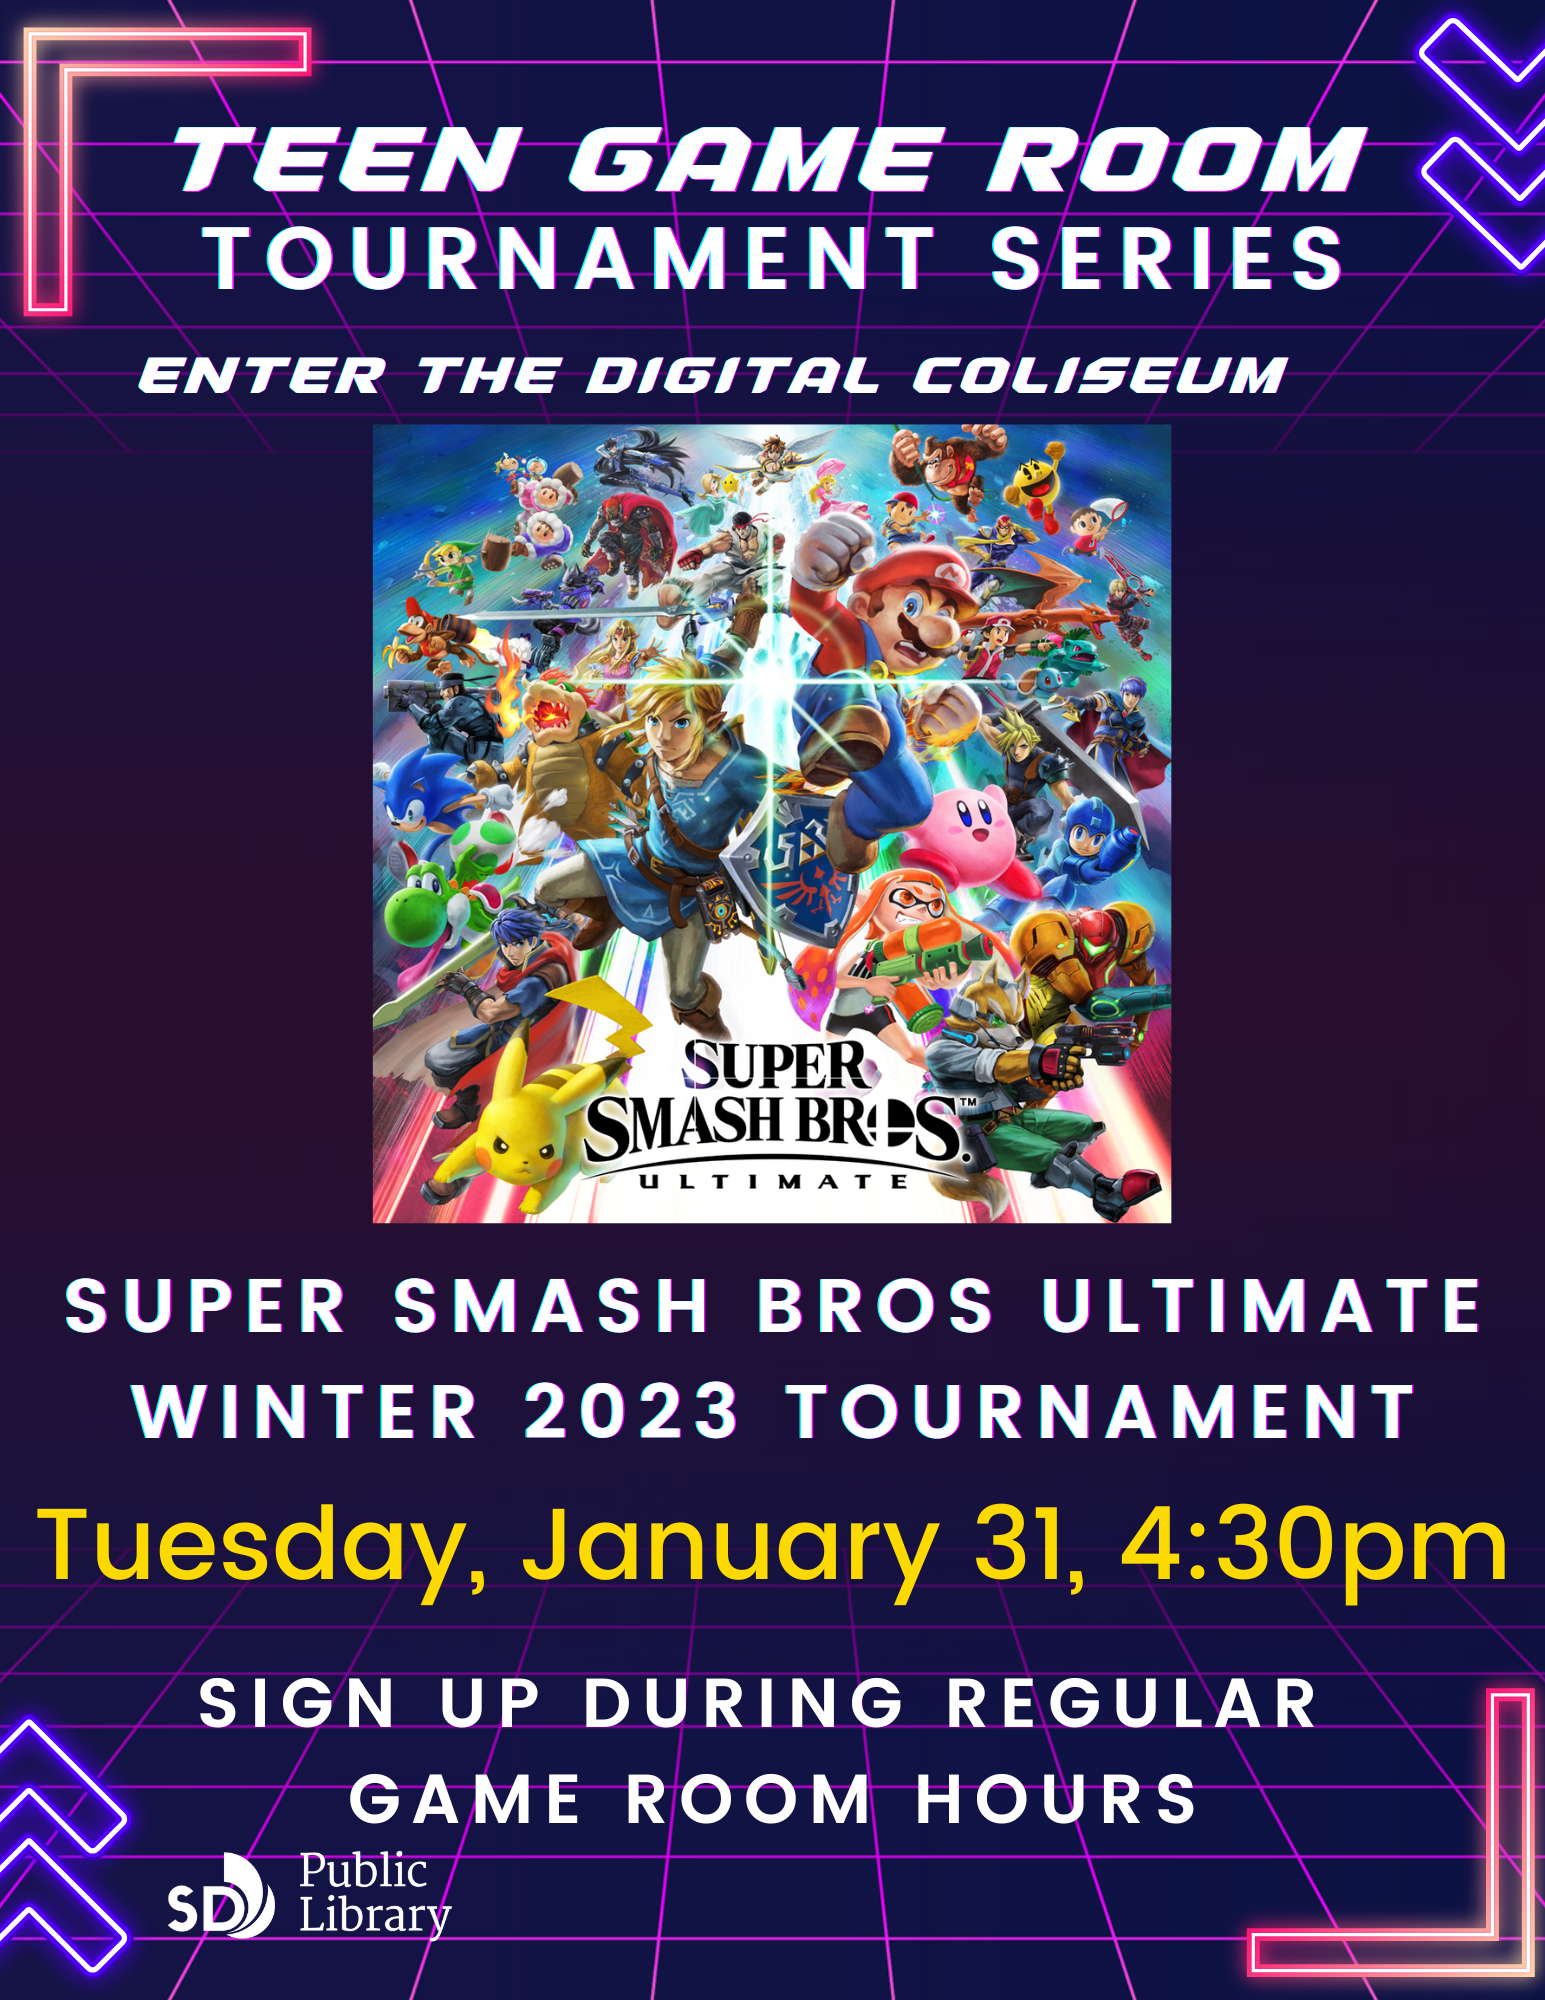 Teen Game Room Tournament Series. Enter the digital coliseum. Super Smash Bros Ultimate Winter 2023 Tournament. Tuesday, January 31, 4:30pm. Sign up during regular game room hours.